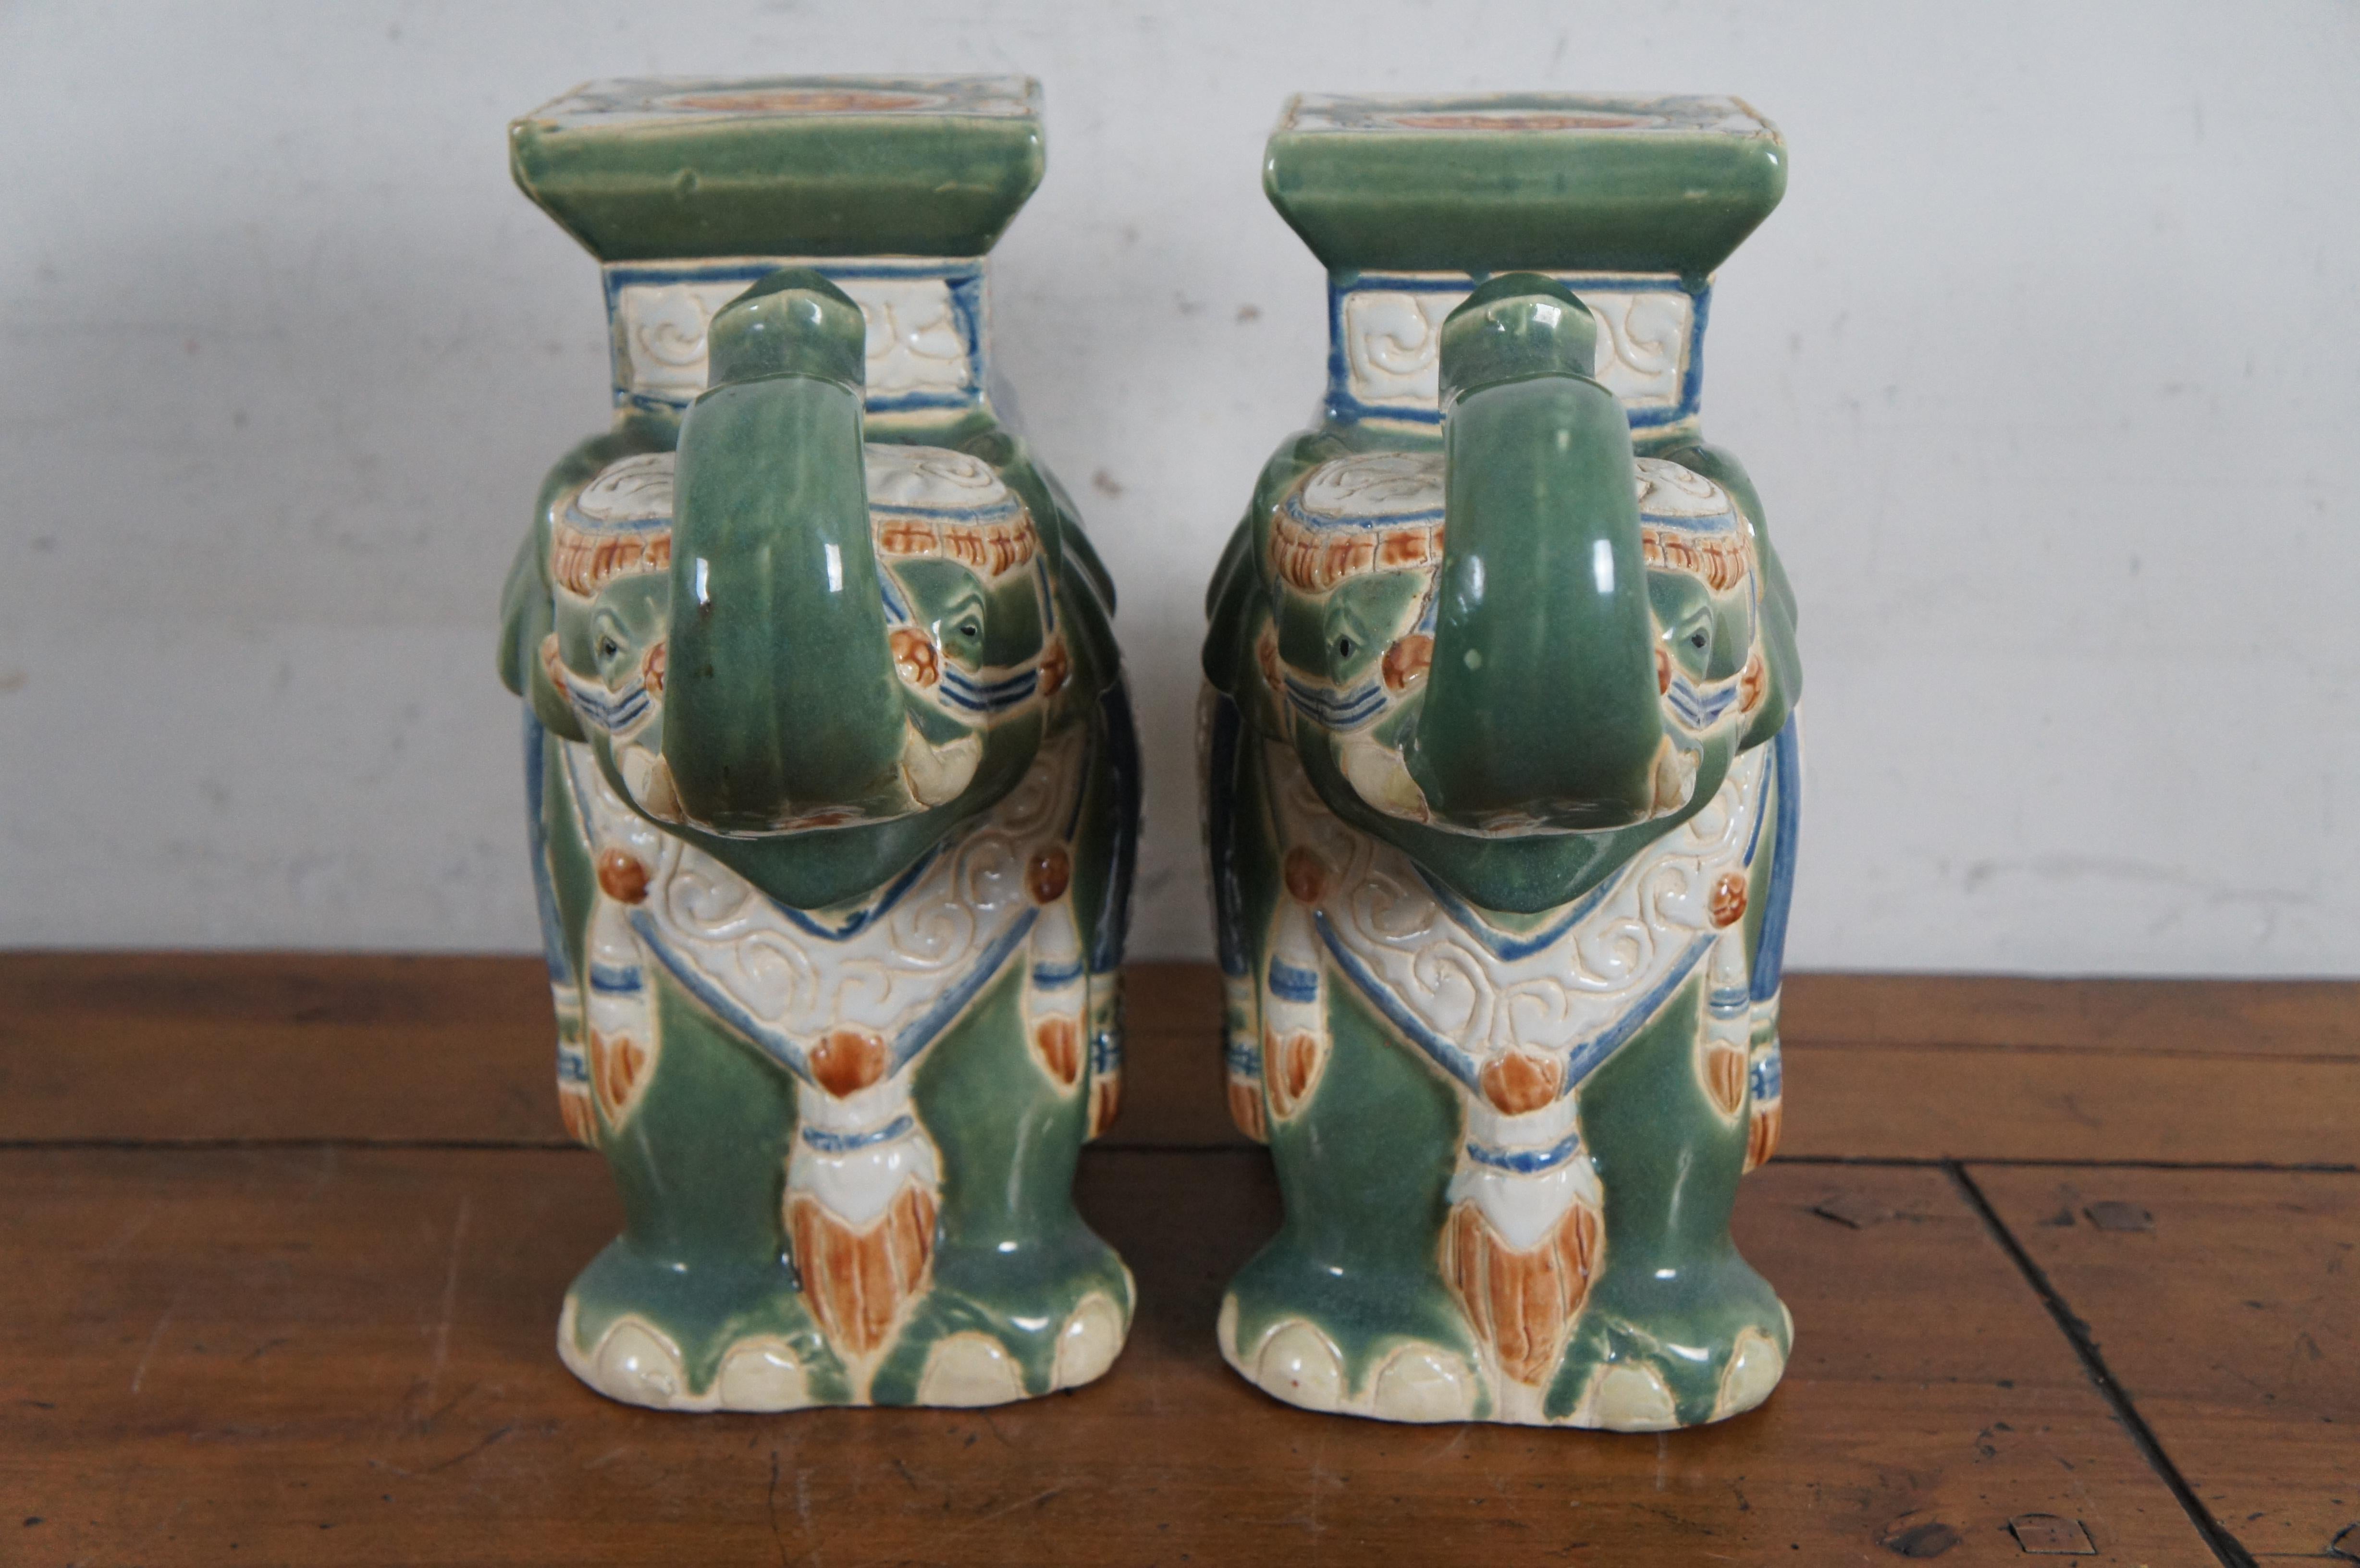 Porcelain 2 Chinoiserie Polychrome Ceramic Elephant Plant Stands Garden Stools Statues